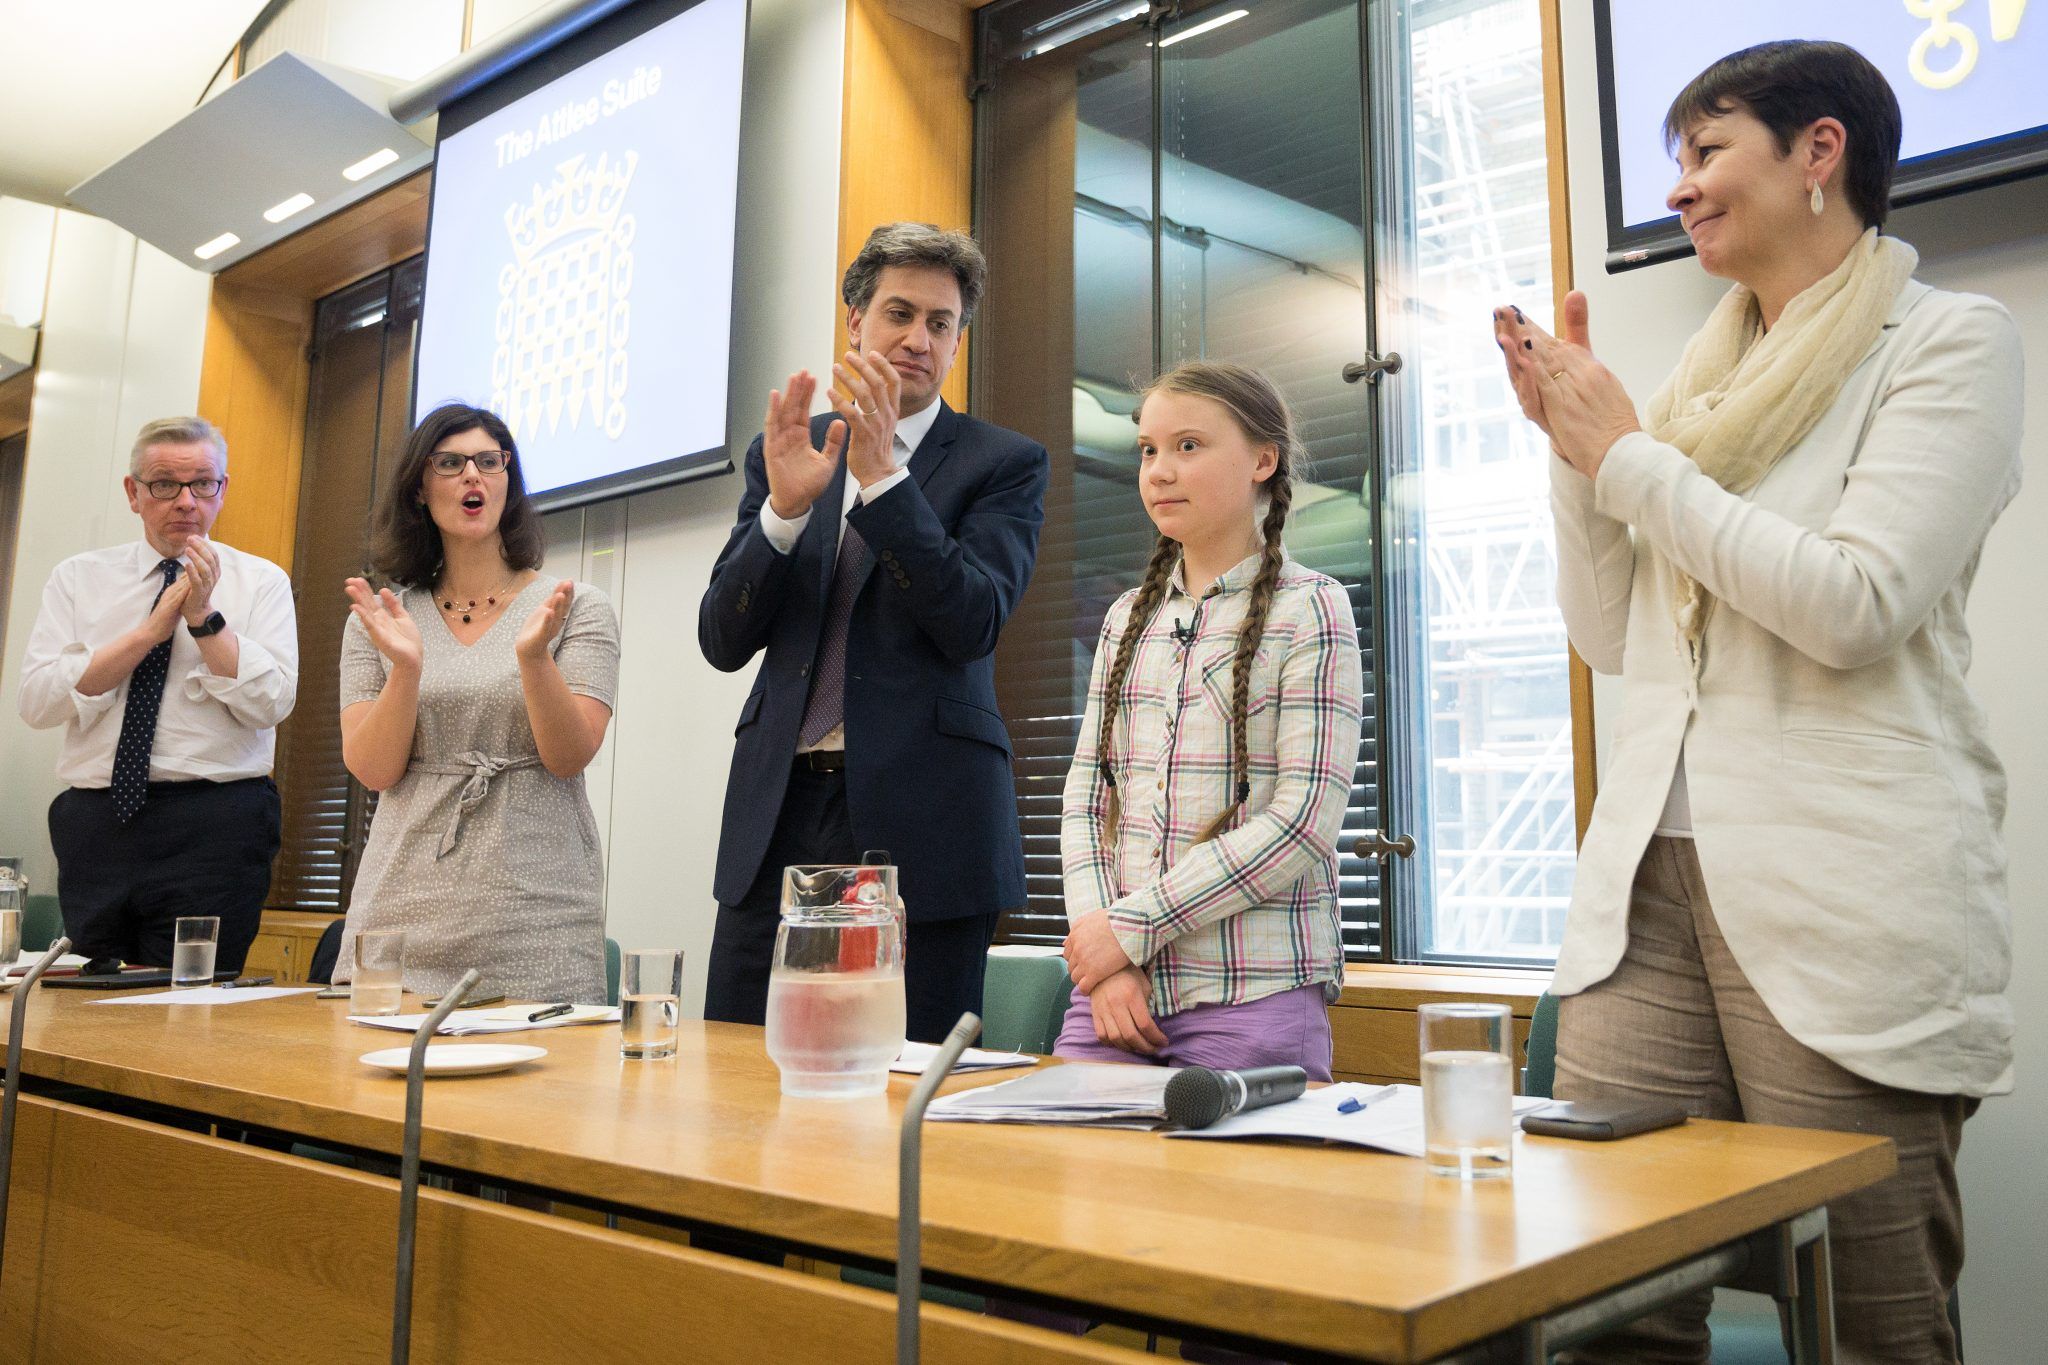 Swedish environmental campaigner Greta Thunberg (2R) receives applause after addressing politicians, media and guests within the Houses of Parliament on April 23, 2019 in London, England. Her visit coincides with the ongoing "Extinction Rebellion" protests across London, which have seen days of disruption to roads and transport systems, in a bid to highlight the dangers of climate change. (Photo by Leon Neal/Getty Images)